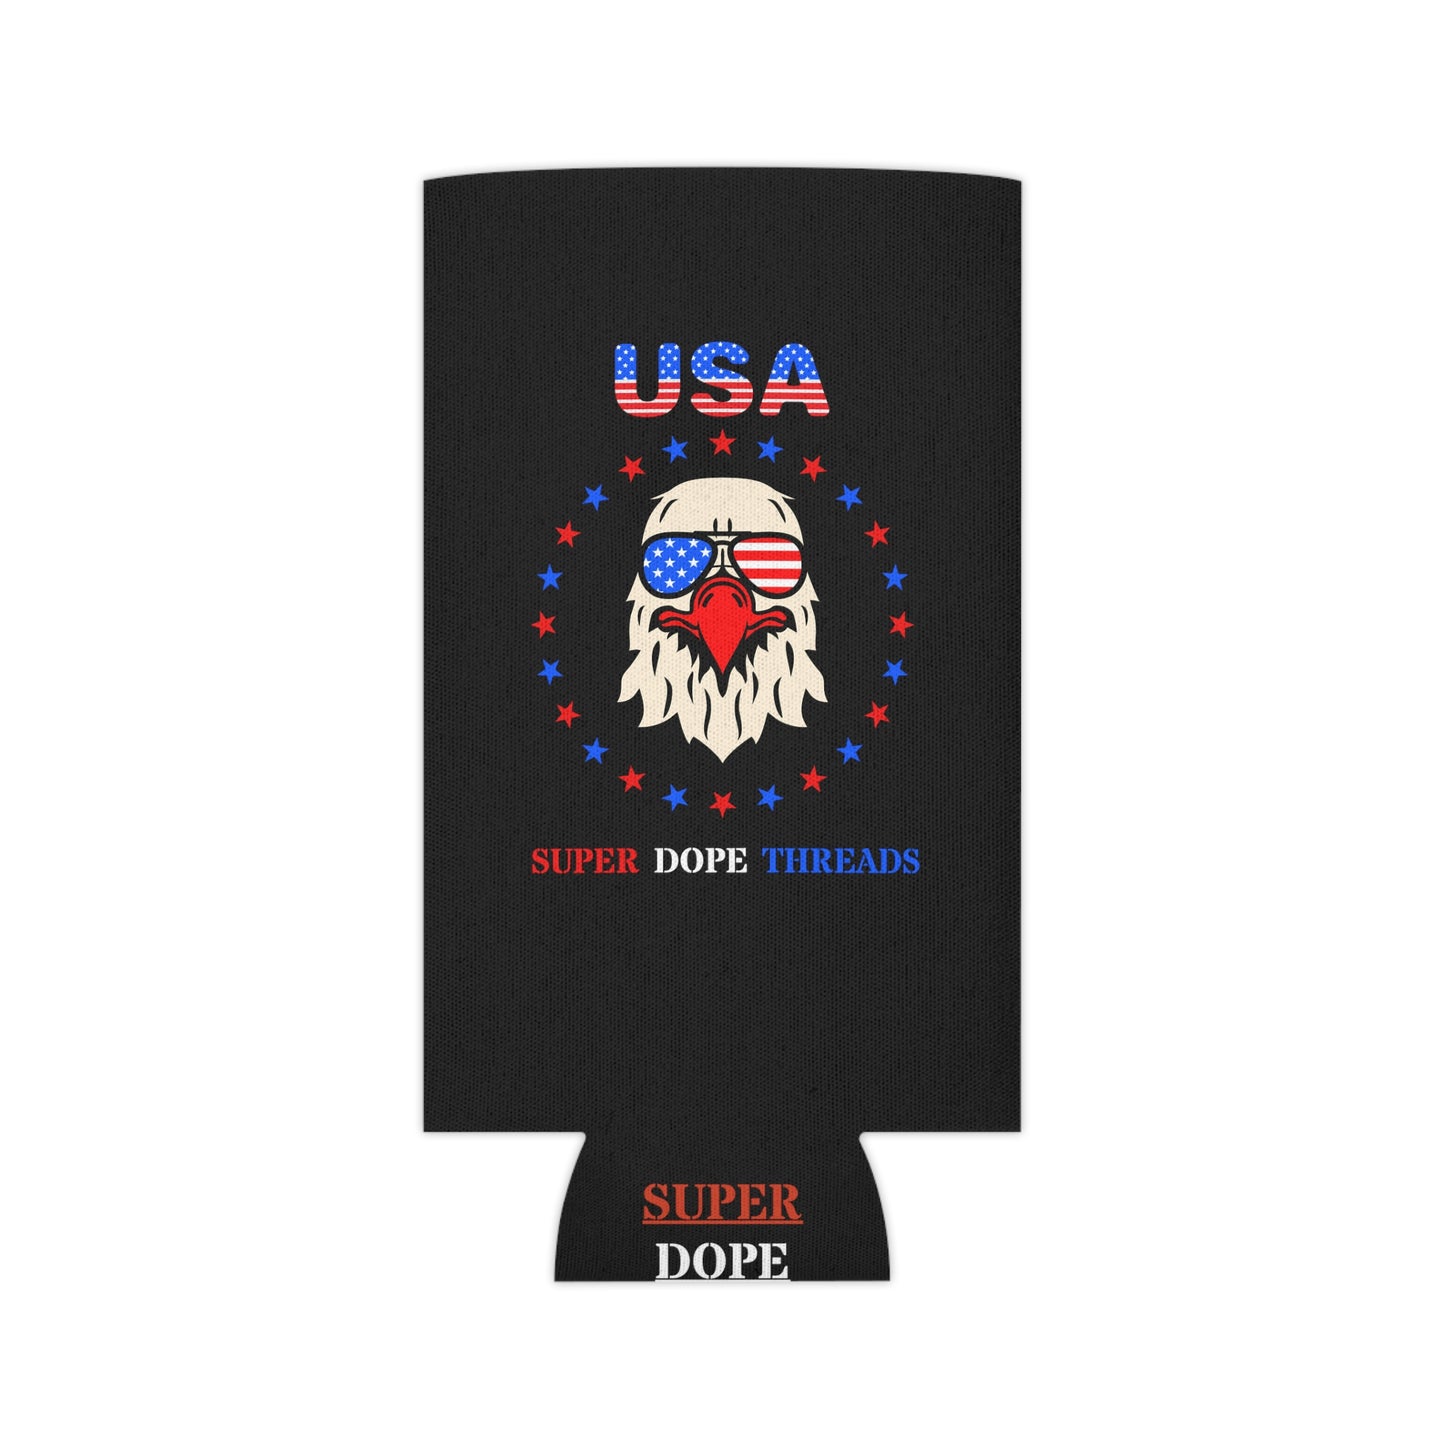 Super Dope Threads - 4th of July Coozie